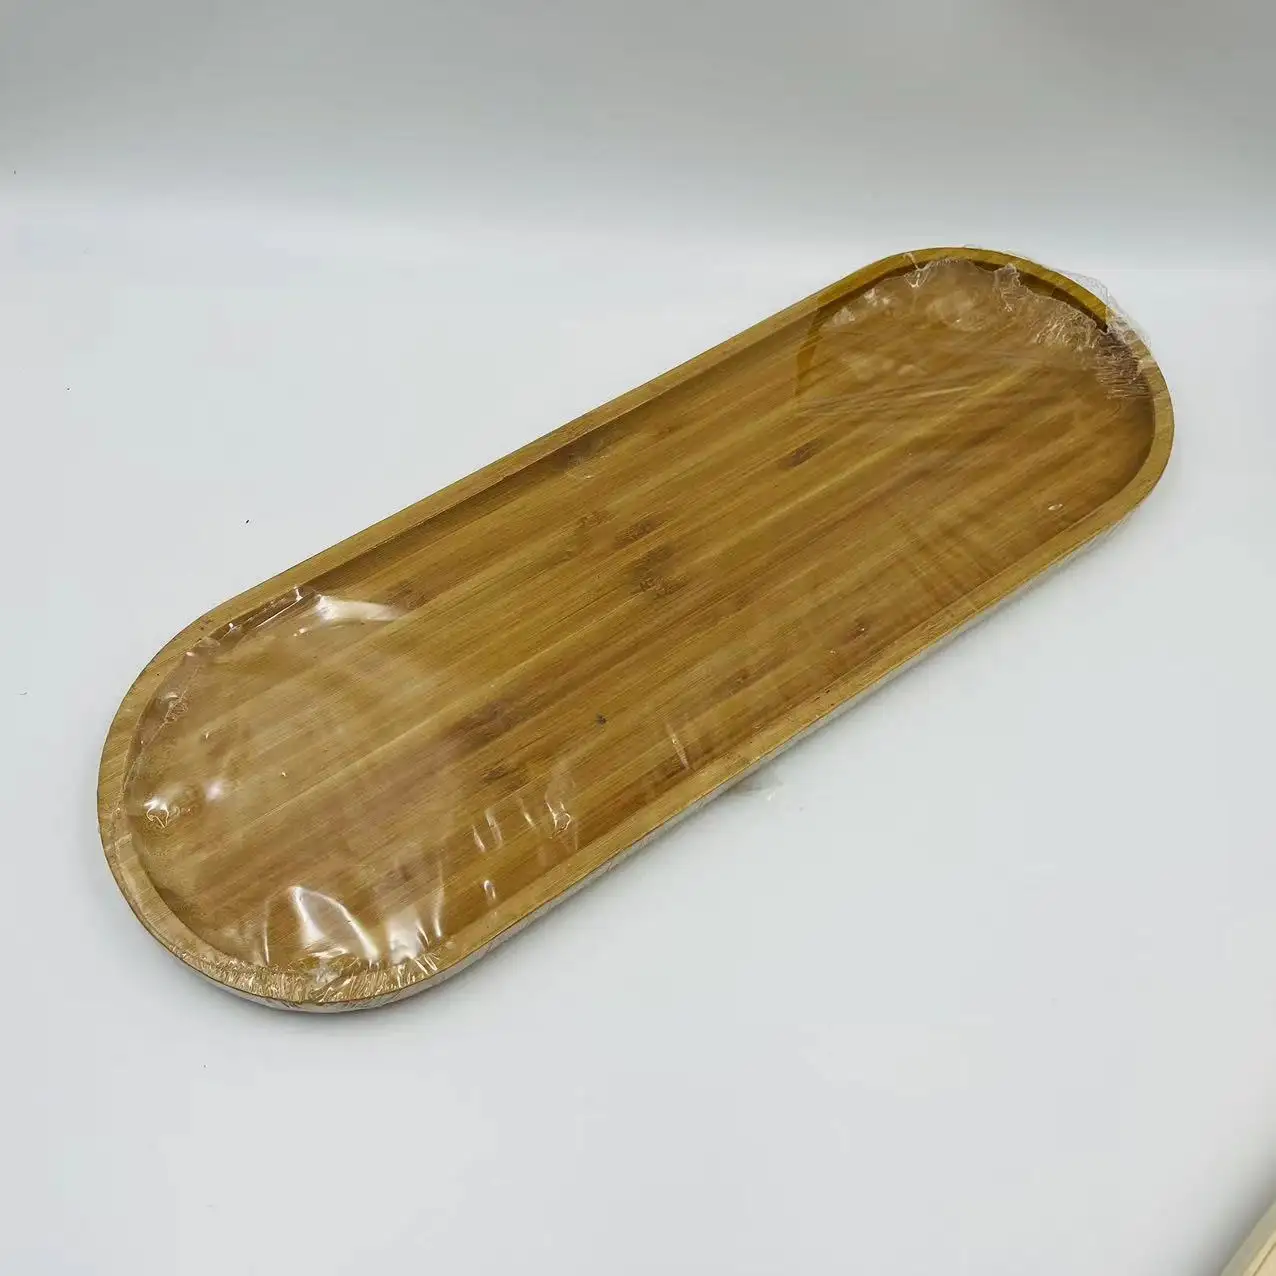 New Arrival 45*15.5*1.5cm Bamboo Oval Dessert Cup Tray Bamboo Lunch Tray Serving Bamboo Tray For Food